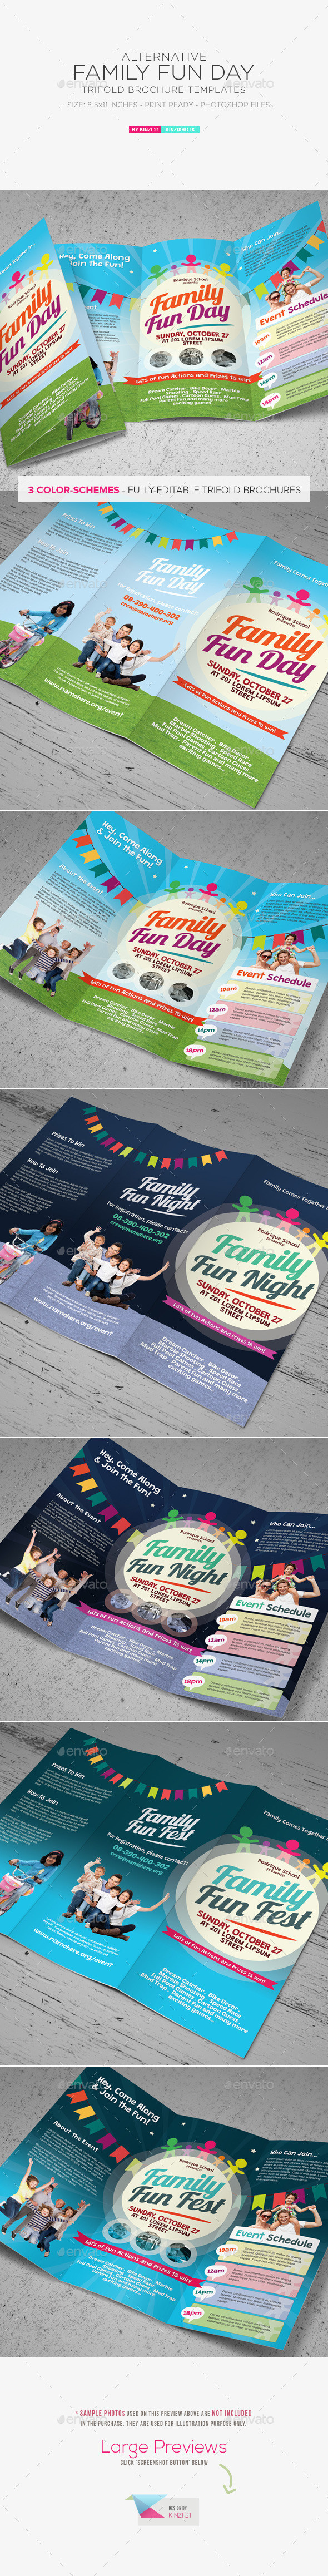 Graphic river family fun day trifold brochures kinzishots